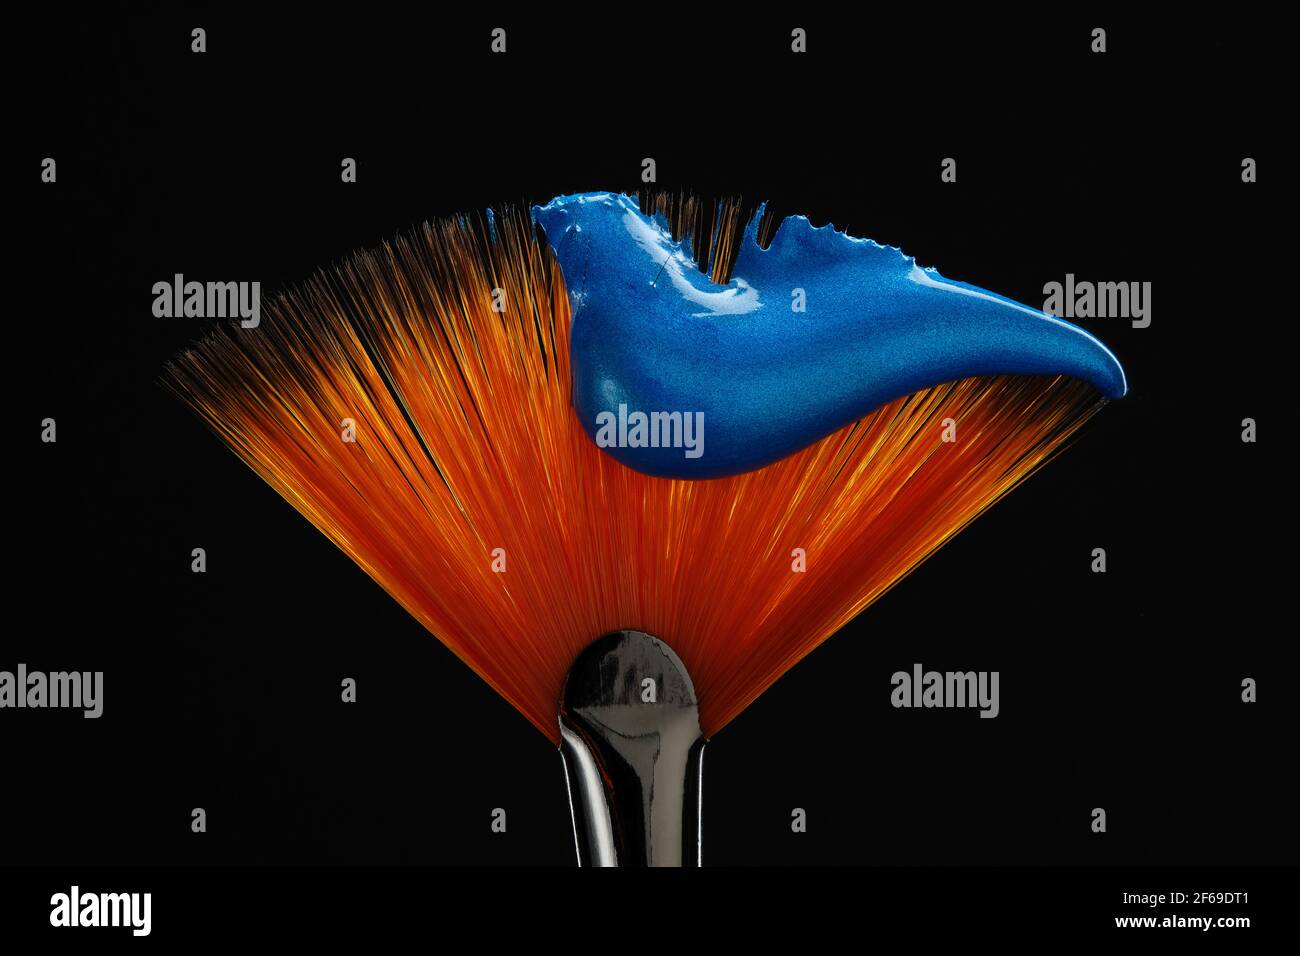 Fan shaped paintbrush with paint in blue color at the tip. Artistic flat fan shaped paintbrush against a black background closeup. Stock Photo